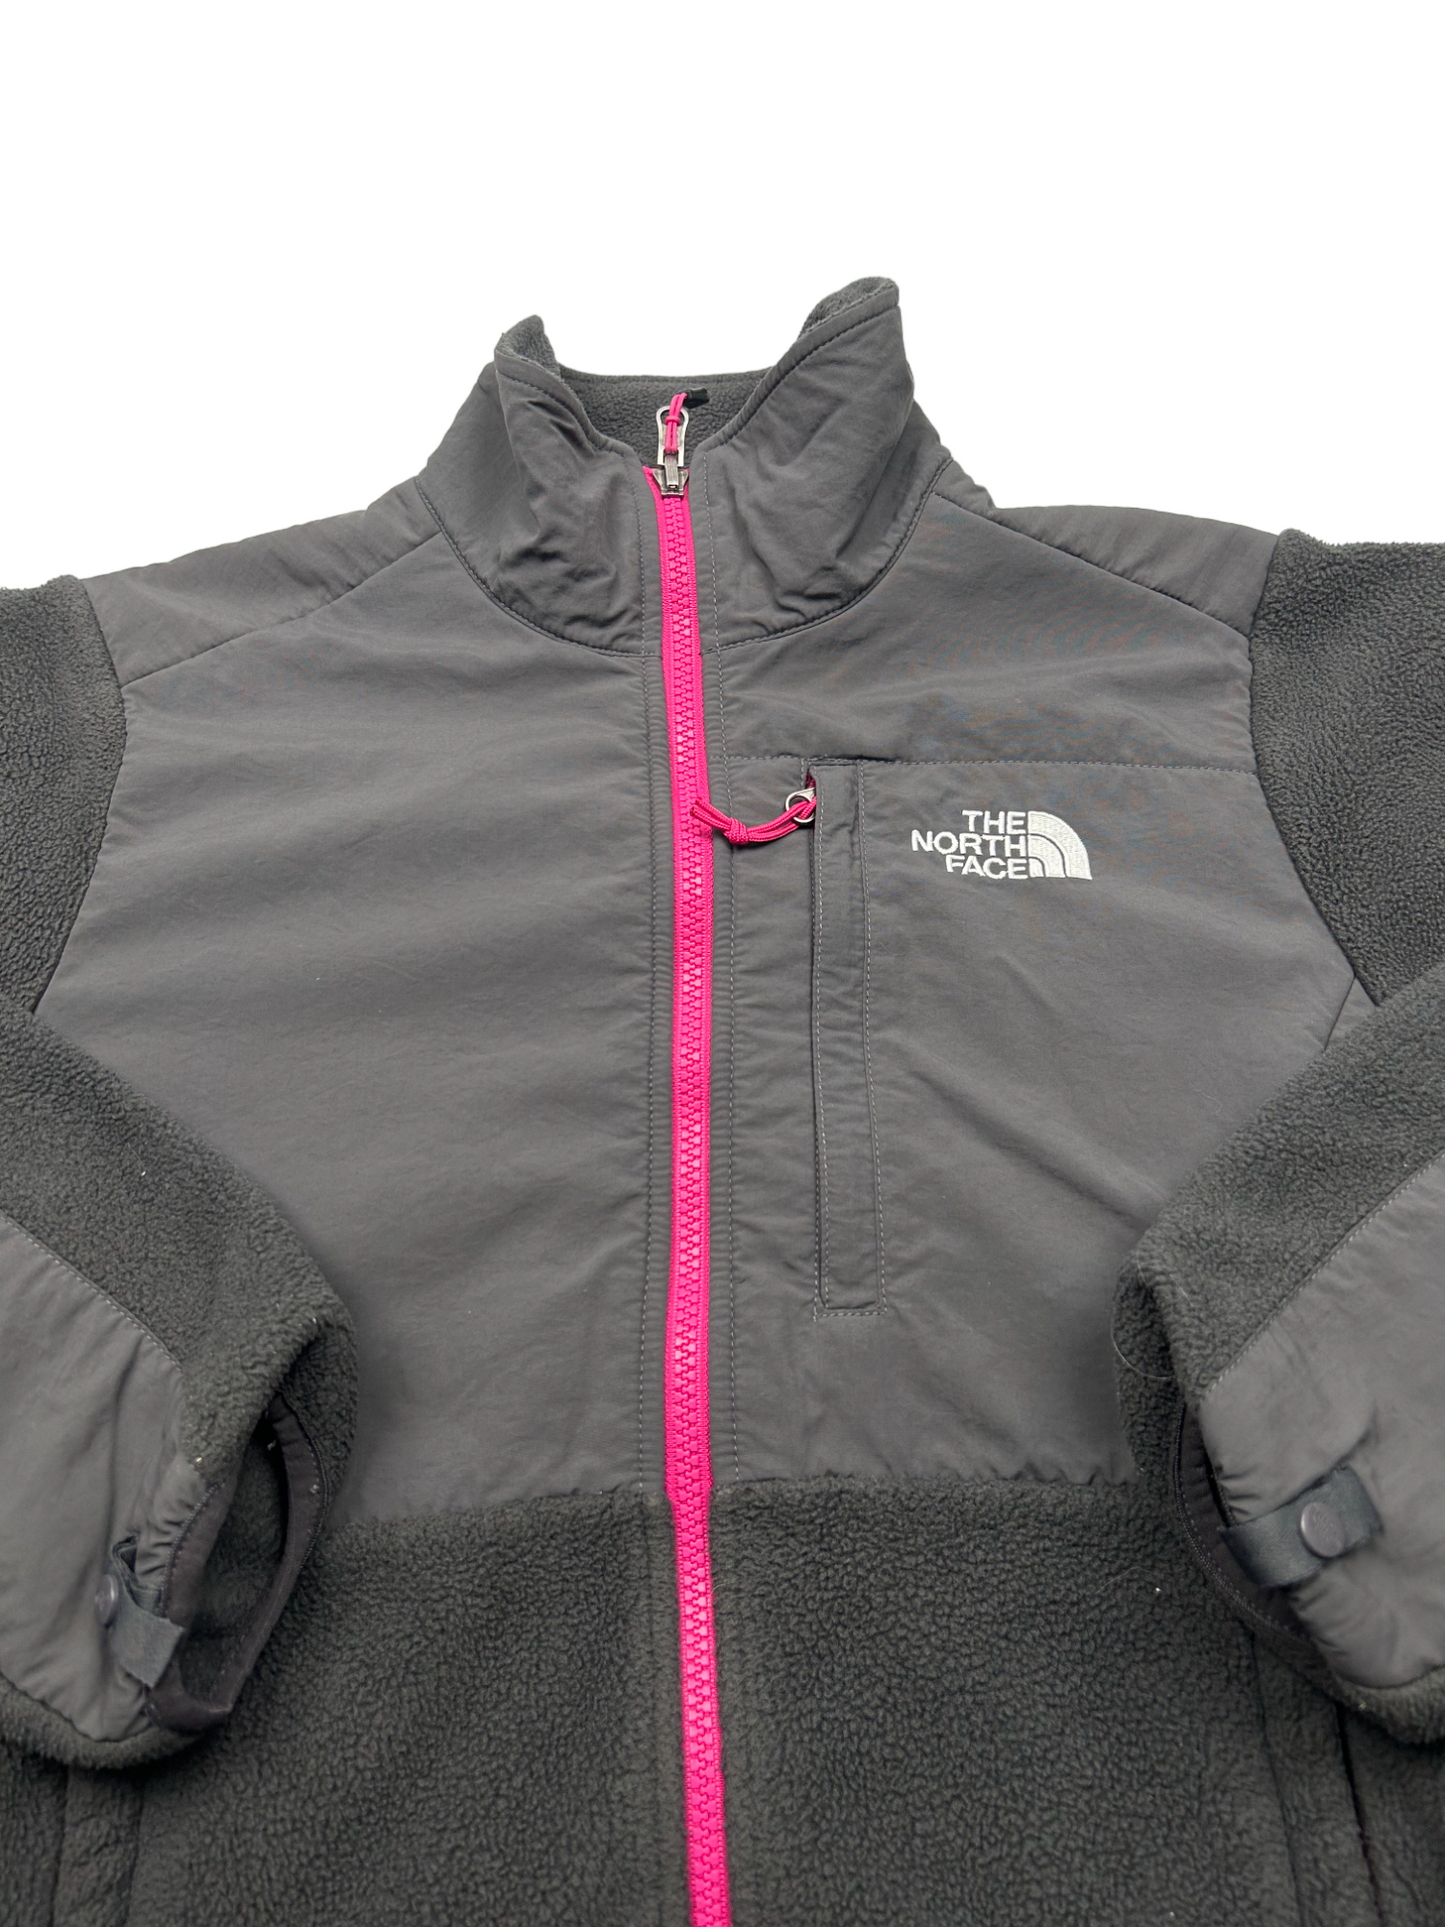 The North Face Grey & Pink Fleece